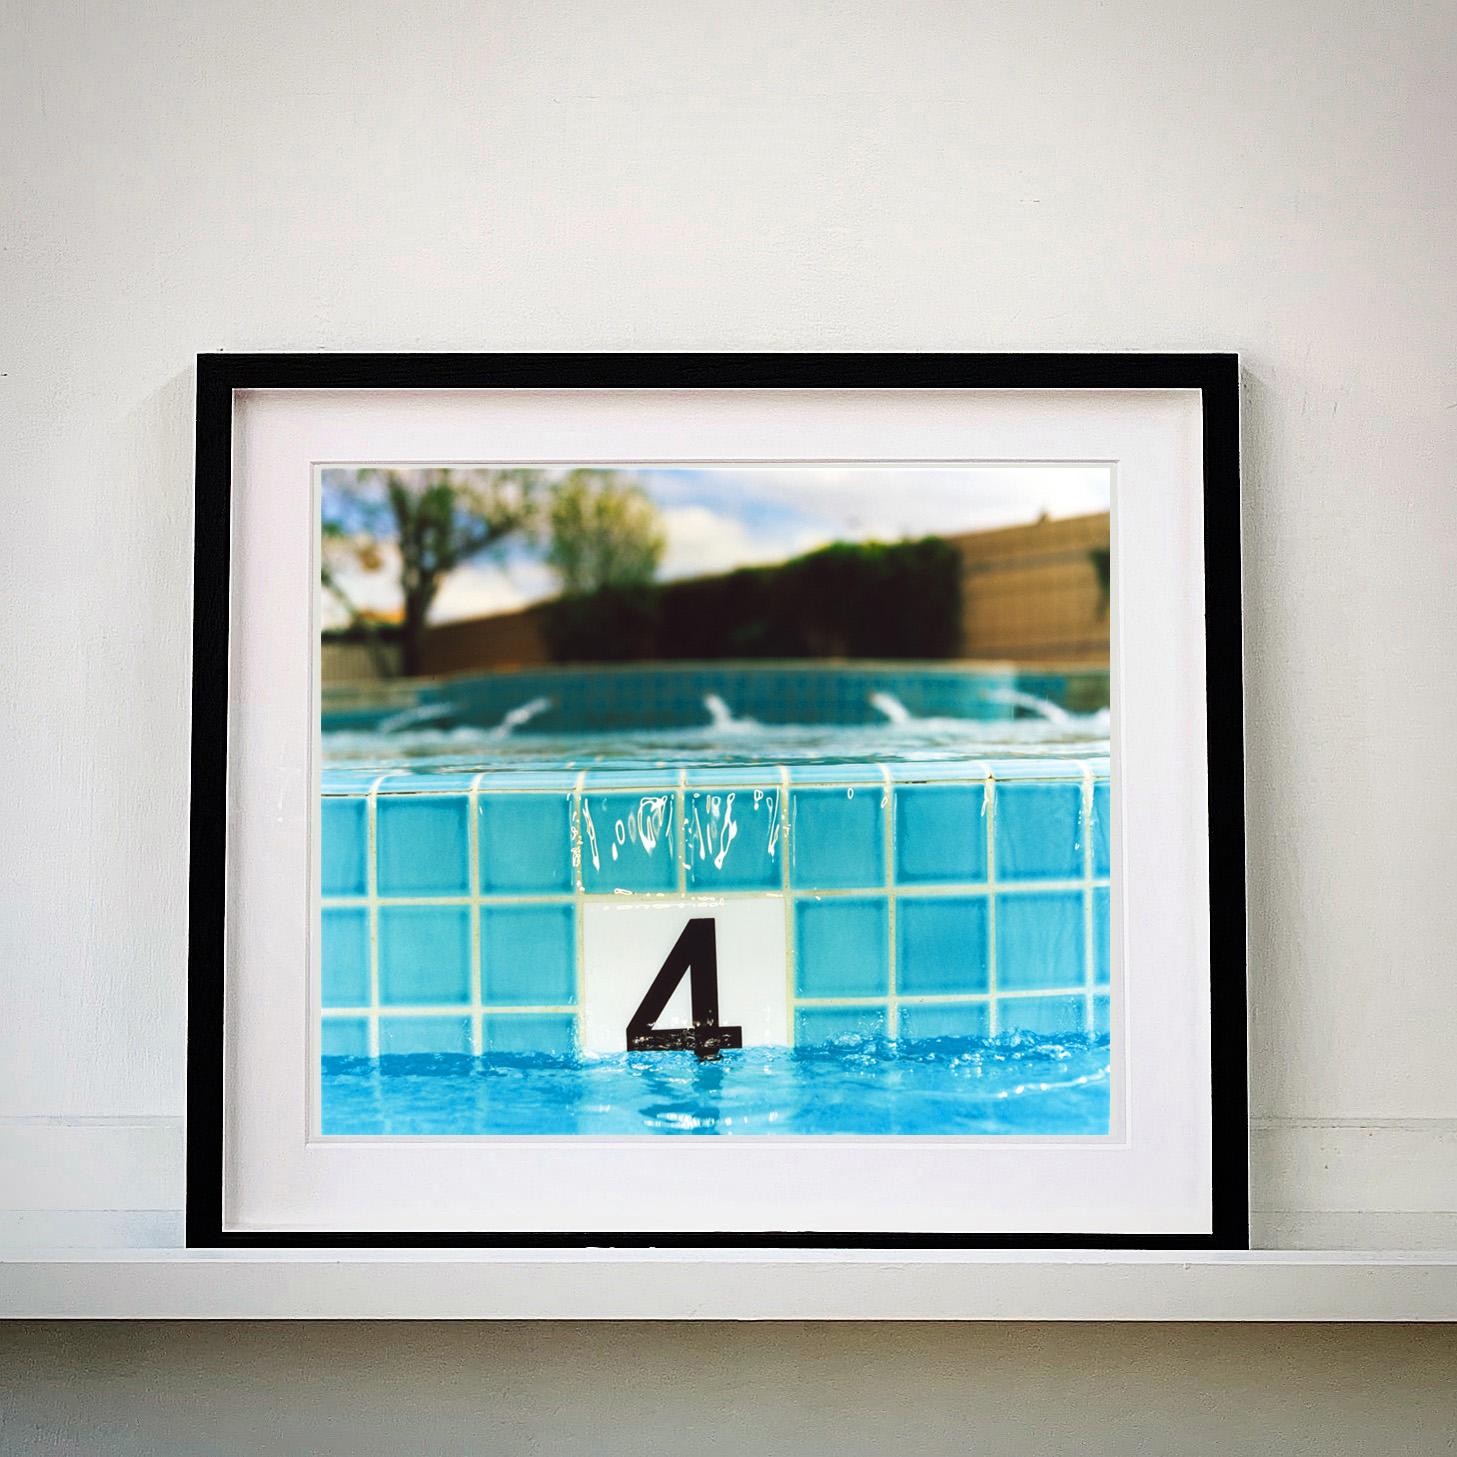 Part of Richard Heeps 'Dream in Colour' Series, with some seriously cool blue colours and pool vibes.

This artwork is a limited edition of 25, gloss photographic print, dry-mounted to aluminium, presented in a museum board white window mount and a